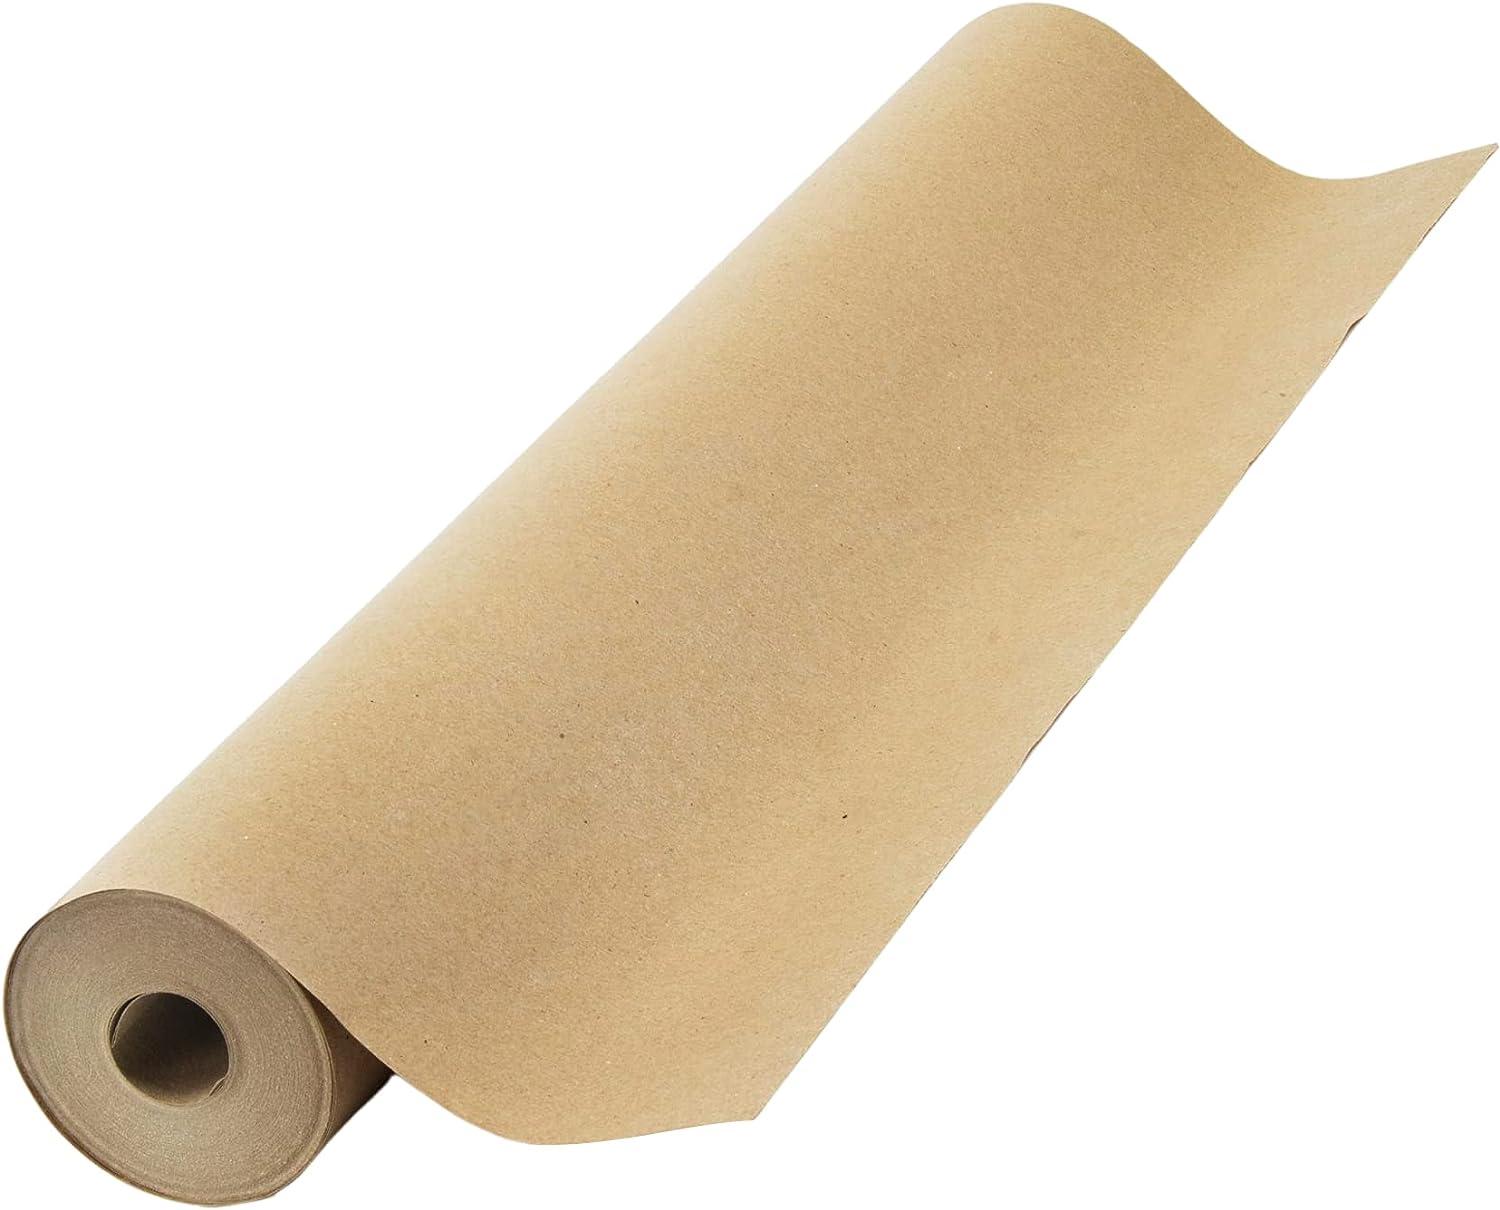 Kraft Paper Roll, 100% Recycled #30 – 24 in x 1200 ft